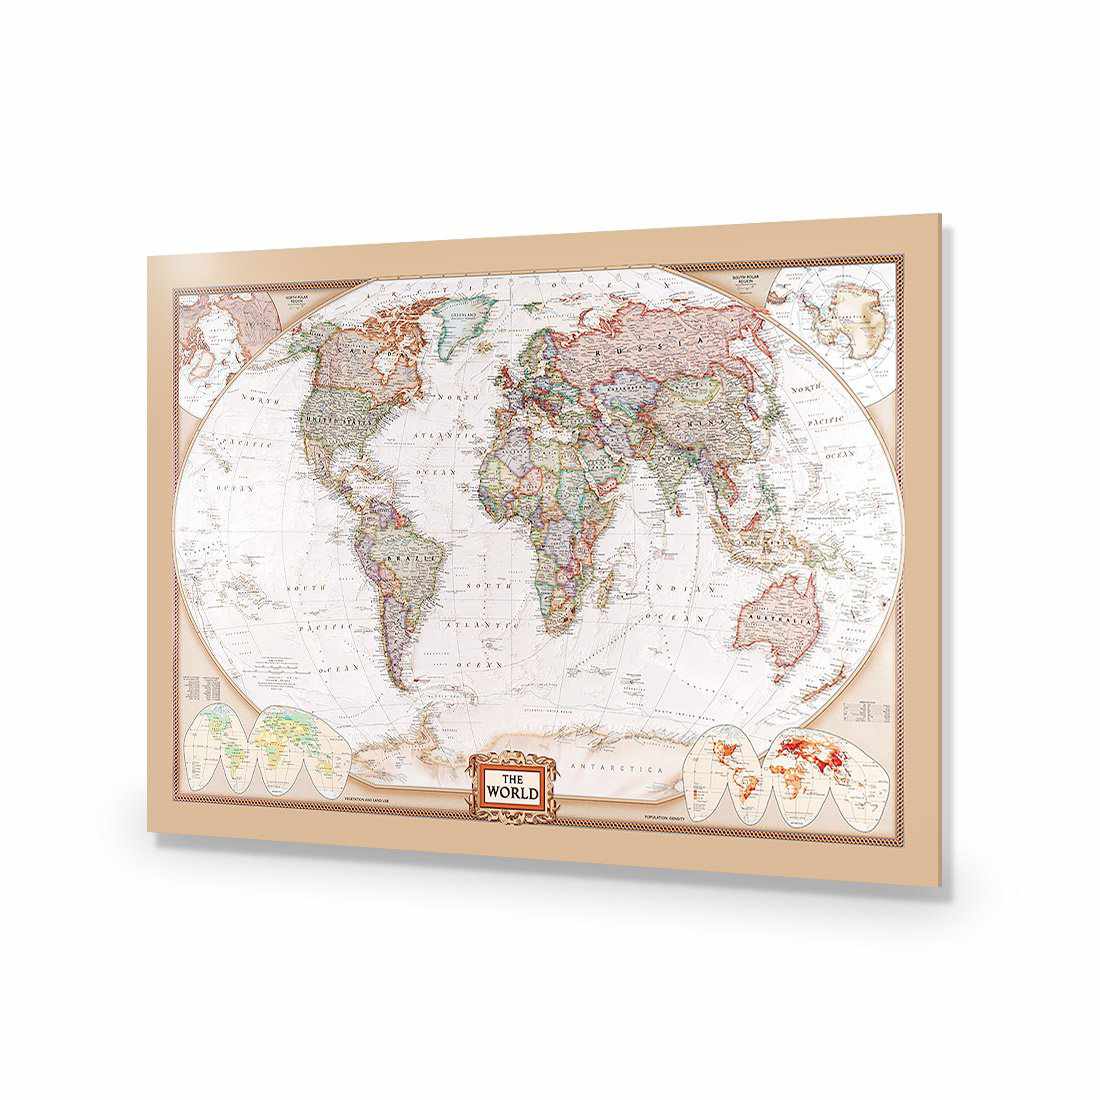 The World Map-Acrylic-Wall Art Design-Without Border-Acrylic - No Frame-45x30cm-Wall Art Designs